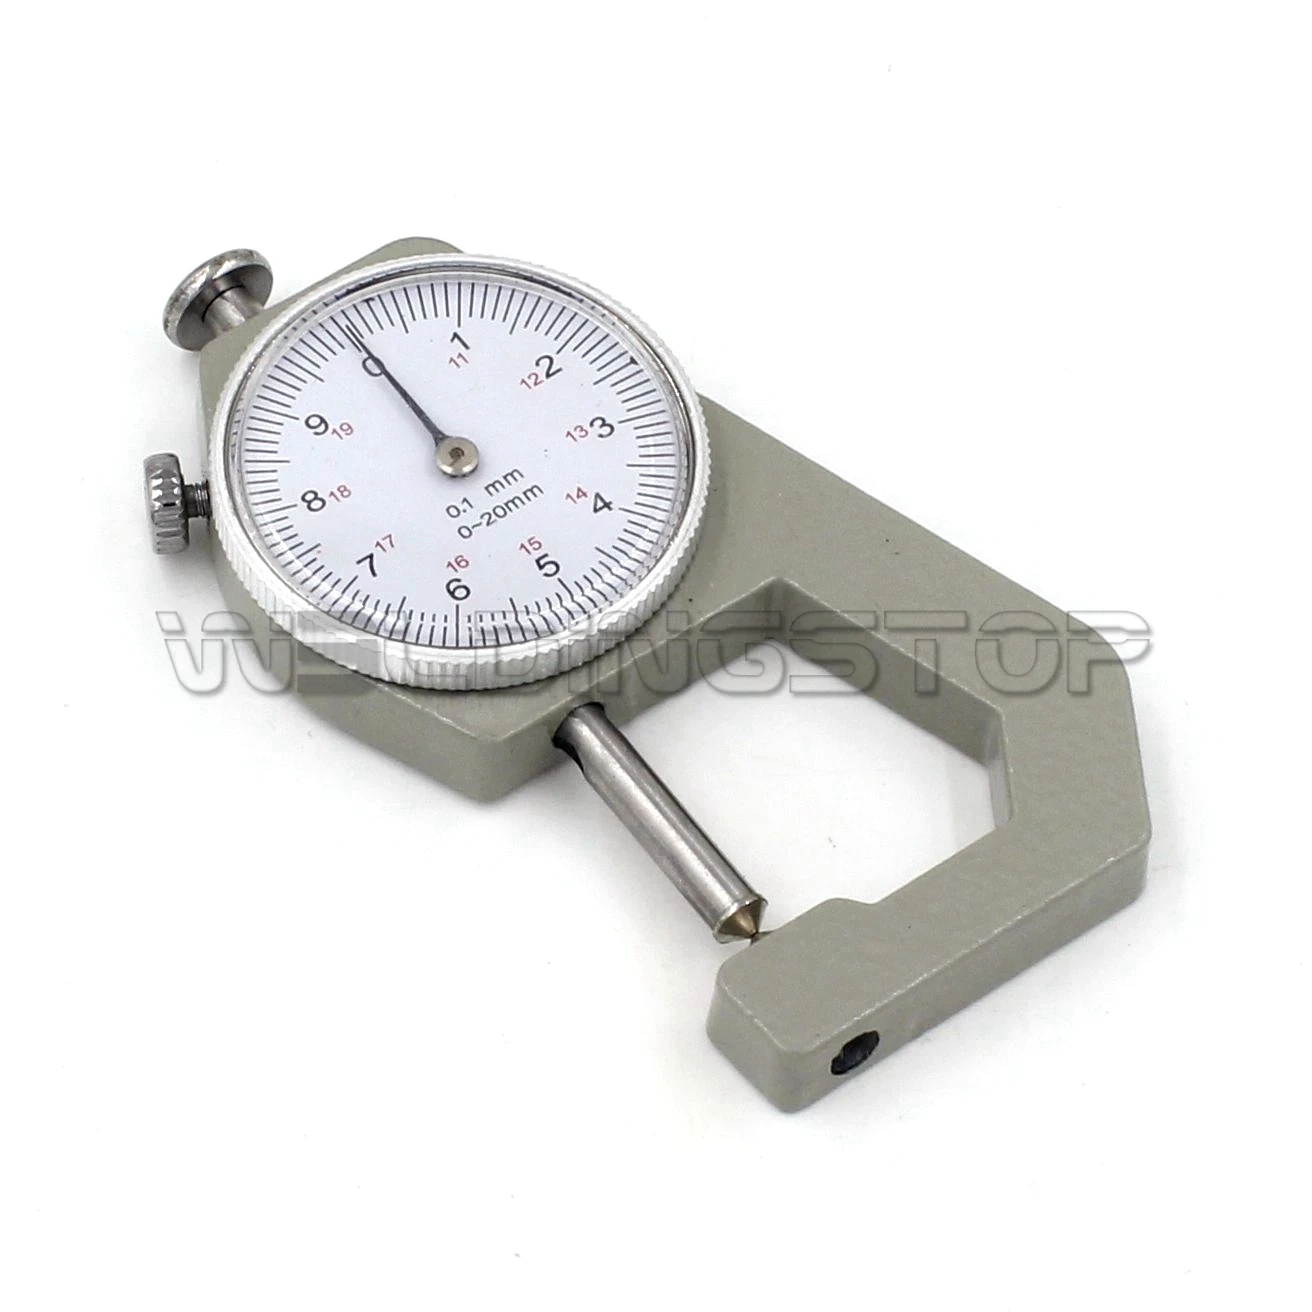 Dial Thickness Gauge 0-20mm 0.1 Increments Cusp Head Gage Inspection Tool Metric Reading 